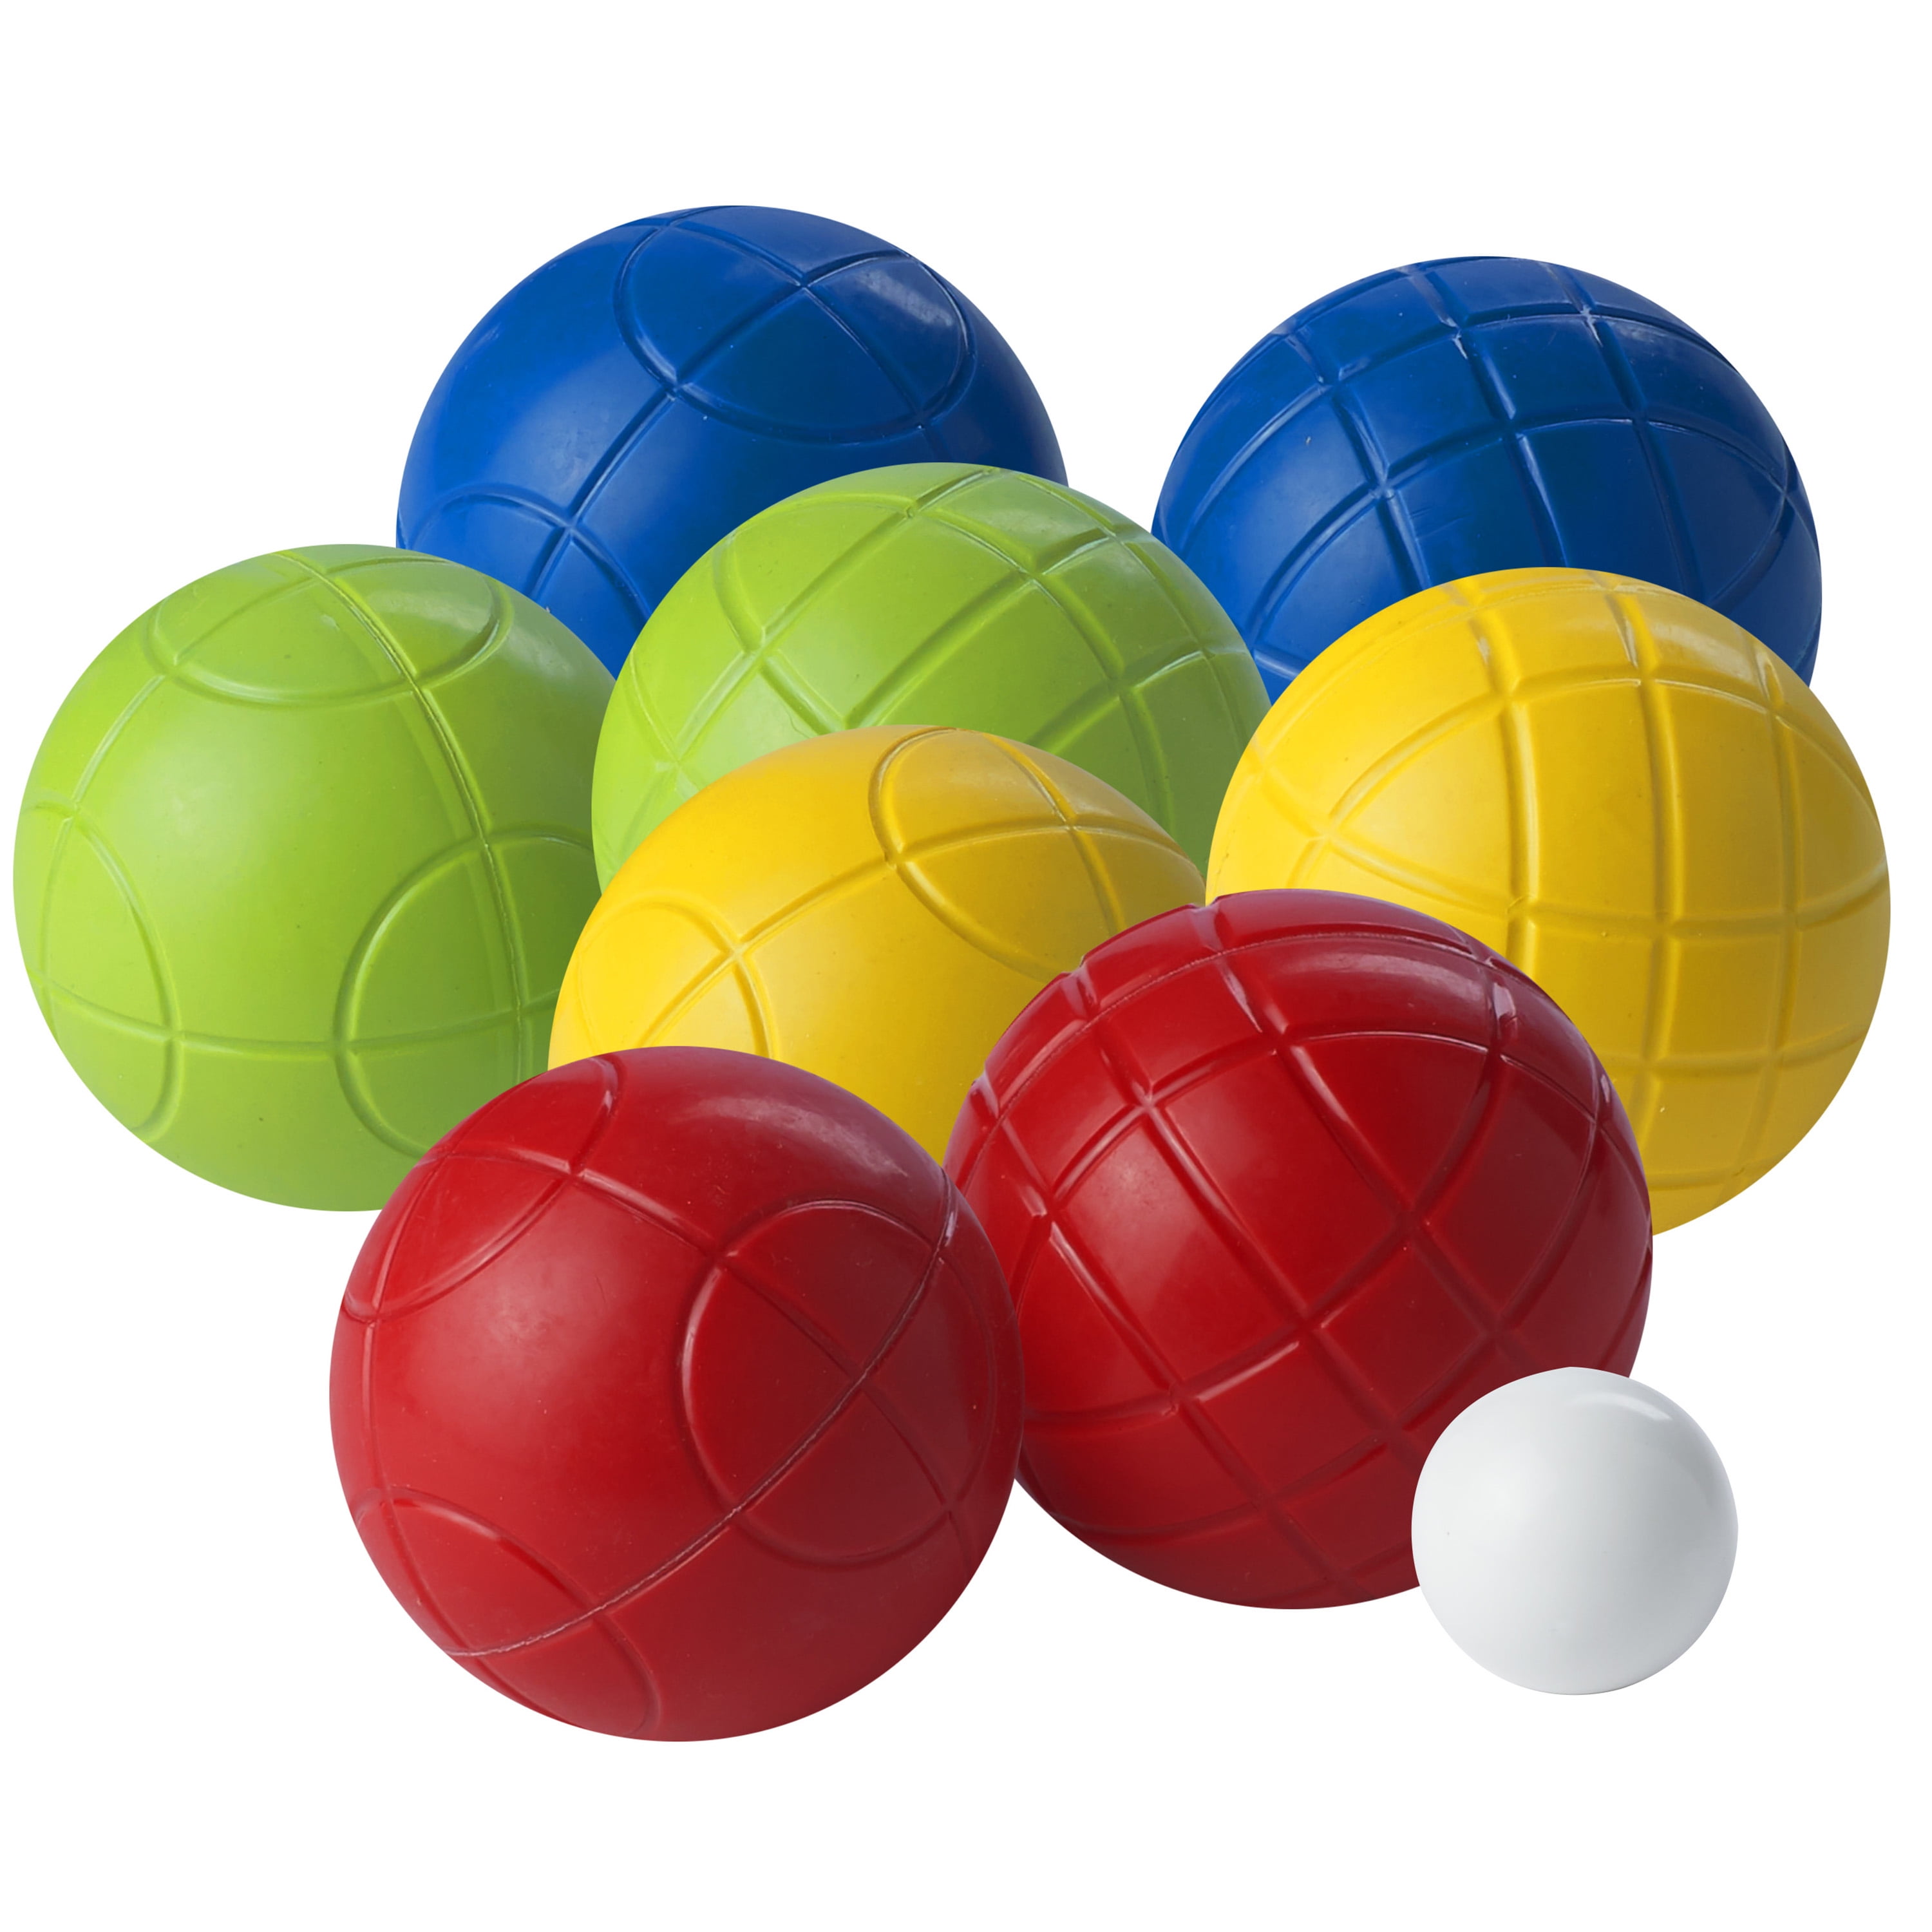 Franklin Sports Bocce Set - 6 All Weather Bocce Balls and 1 Pallino -  Beach, Backyard, or Party Outdoor Game - Family Fun For All Ages - Starter  Set